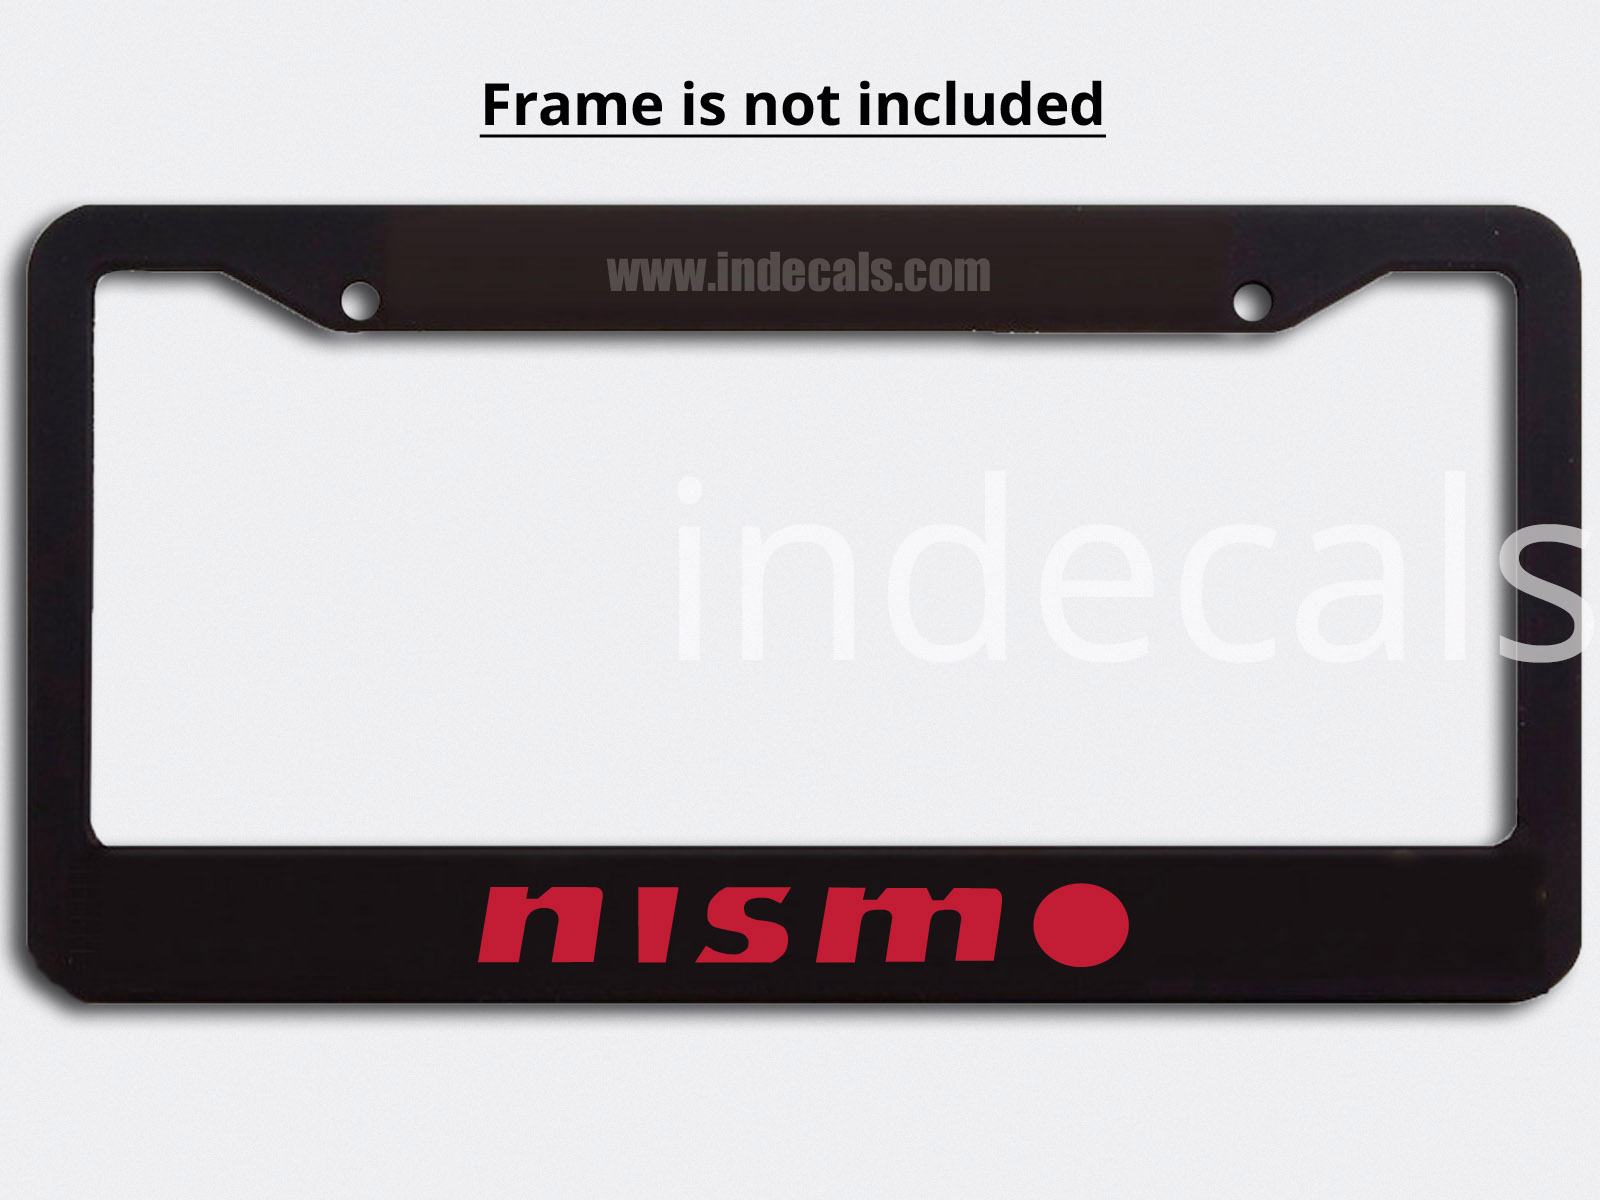 3 x Nismo Stickers for Plate Frame - Red